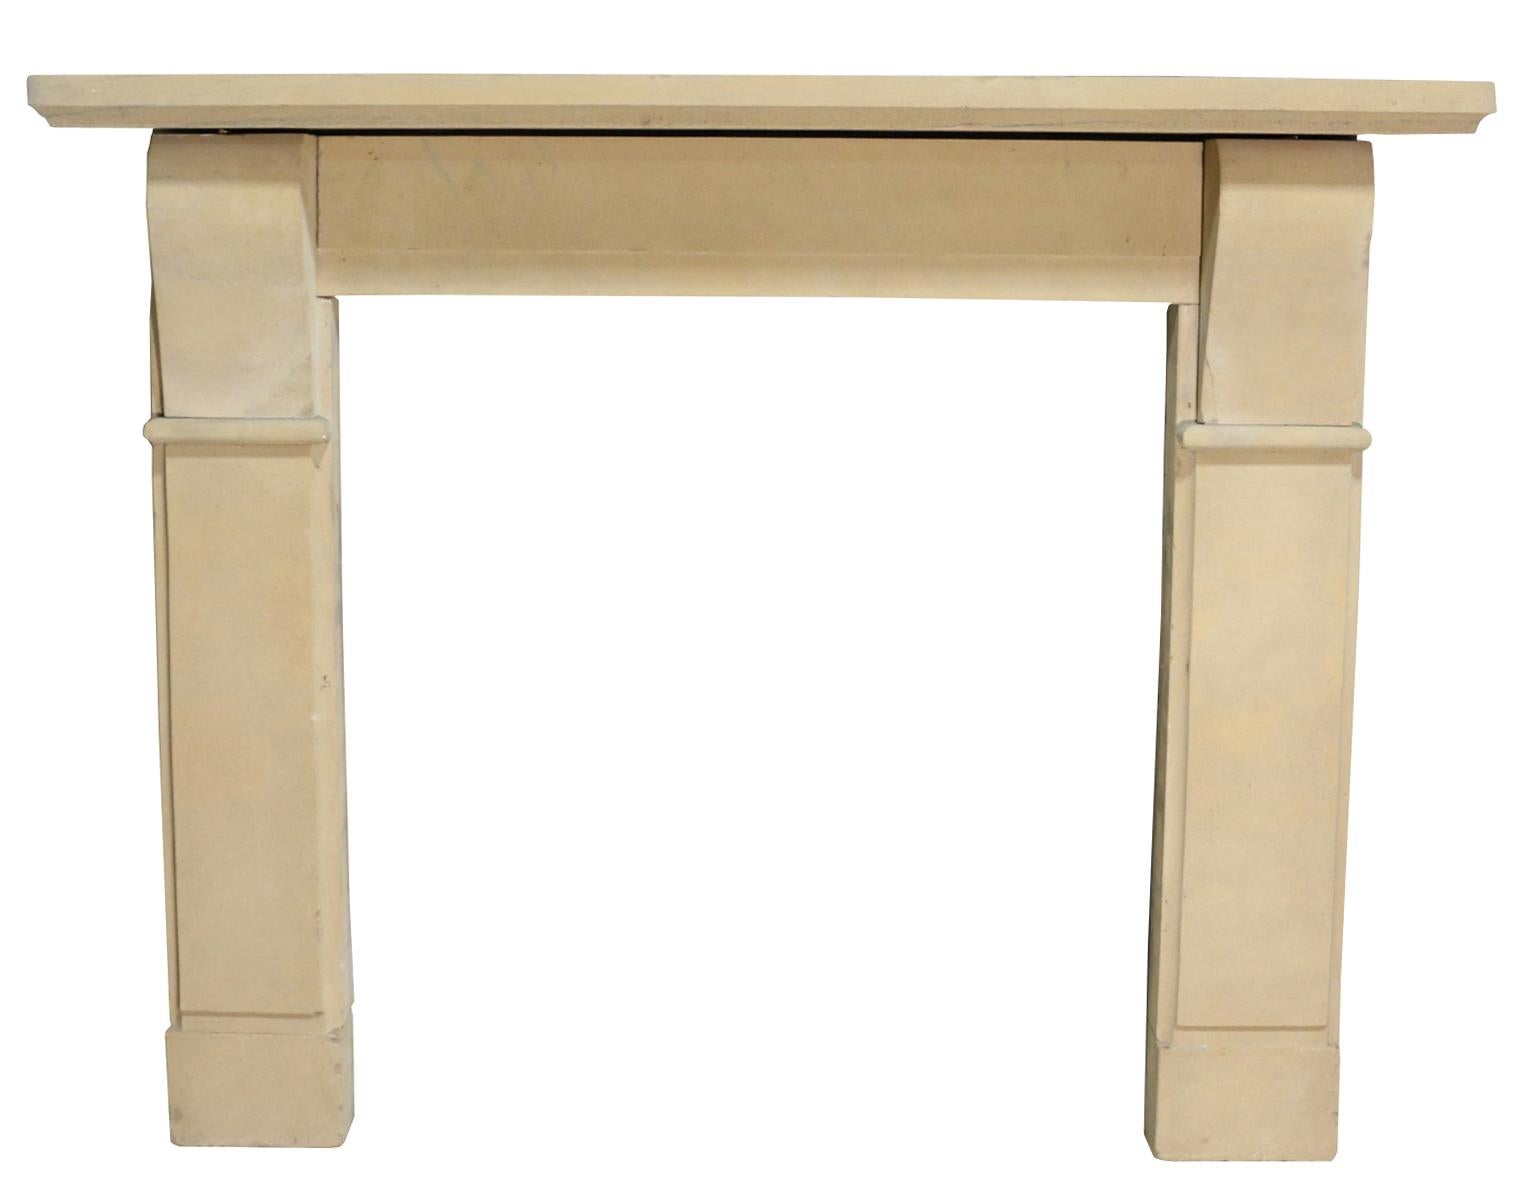 An antique handcarved pale sandstone fire surround salvaged from a property in Derby. Dating to the late Victorian period, this simple yet elegant fireplace offers a timeless look with its smooth finish and pale sandstone - a handsome feature for